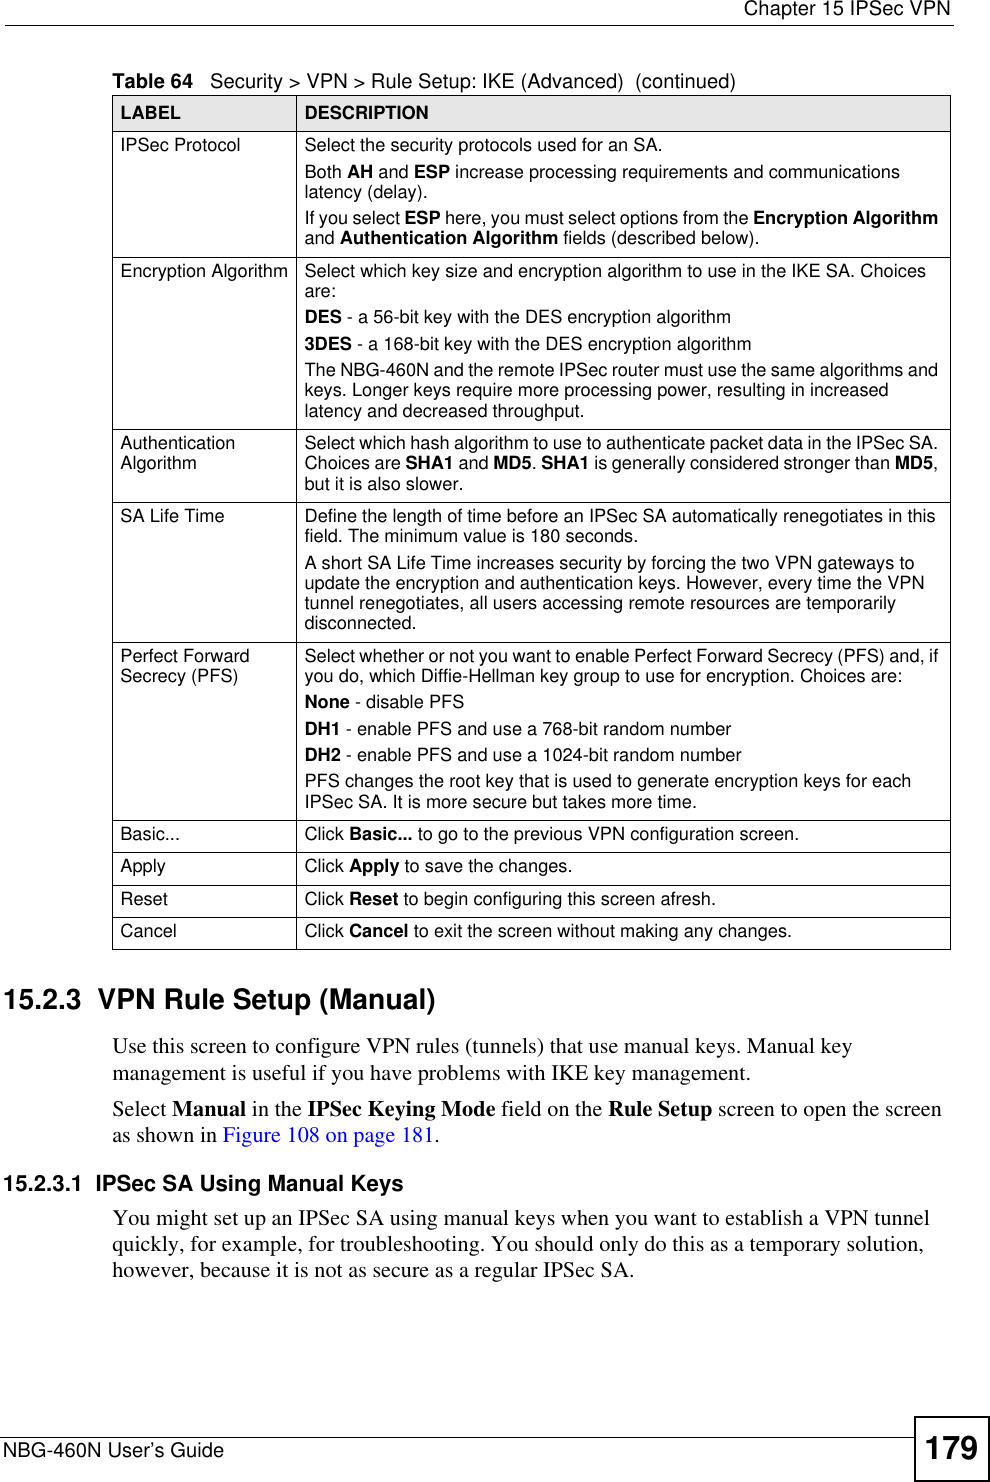  Chapter 15 IPSec VPNNBG-460N User’s Guide 17915.2.3  VPN Rule Setup (Manual)Use this screen to configure VPN rules (tunnels) that use manual keys. Manual key management is useful if you have problems with IKE key management.Select Manual in the IPSec Keying Mode field on the Rule Setup screen to open the screen as shown in Figure 108 on page 181.15.2.3.1  IPSec SA Using Manual Keys    You might set up an IPSec SA using manual keys when you want to establish a VPN tunnel quickly, for example, for troubleshooting. You should only do this as a temporary solution, however, because it is not as secure as a regular IPSec SA.IPSec Protocol Select the security protocols used for an SA. Both AH and ESP increase processing requirements and communications latency (delay). If you select ESP here, you must select options from the Encryption Algorithmand Authentication Algorithm fields (described below).Encryption Algorithm Select which key size and encryption algorithm to use in the IKE SA. Choices are:DES - a 56-bit key with the DES encryption algorithm3DES - a 168-bit key with the DES encryption algorithmThe NBG-460N and the remote IPSec router must use the same algorithms and keys. Longer keys require more processing power, resulting in increased latency and decreased throughput.Authentication Algorithm Select which hash algorithm to use to authenticate packet data in the IPSec SA. Choices are SHA1 and MD5.SHA1 is generally considered stronger than MD5,but it is also slower.SA Life Time  Define the length of time before an IPSec SA automatically renegotiates in this field. The minimum value is 180 seconds.A short SA Life Time increases security by forcing the two VPN gateways to update the encryption and authentication keys. However, every time the VPN tunnel renegotiates, all users accessing remote resources are temporarily disconnected.Perfect Forward Secrecy (PFS) Select whether or not you want to enable Perfect Forward Secrecy (PFS) and, if you do, which Diffie-Hellman key group to use for encryption. Choices are:None - disable PFSDH1 - enable PFS and use a 768-bit random numberDH2 - enable PFS and use a 1024-bit random numberPFS changes the root key that is used to generate encryption keys for each IPSec SA. It is more secure but takes more time.Basic... Click Basic... to go to the previous VPN configuration screen. Apply Click Apply to save the changes. Reset Click Reset to begin configuring this screen afresh.Cancel Click Cancel to exit the screen without making any changes.Table 64   Security &gt; VPN &gt; Rule Setup: IKE (Advanced)  (continued)LABEL DESCRIPTION